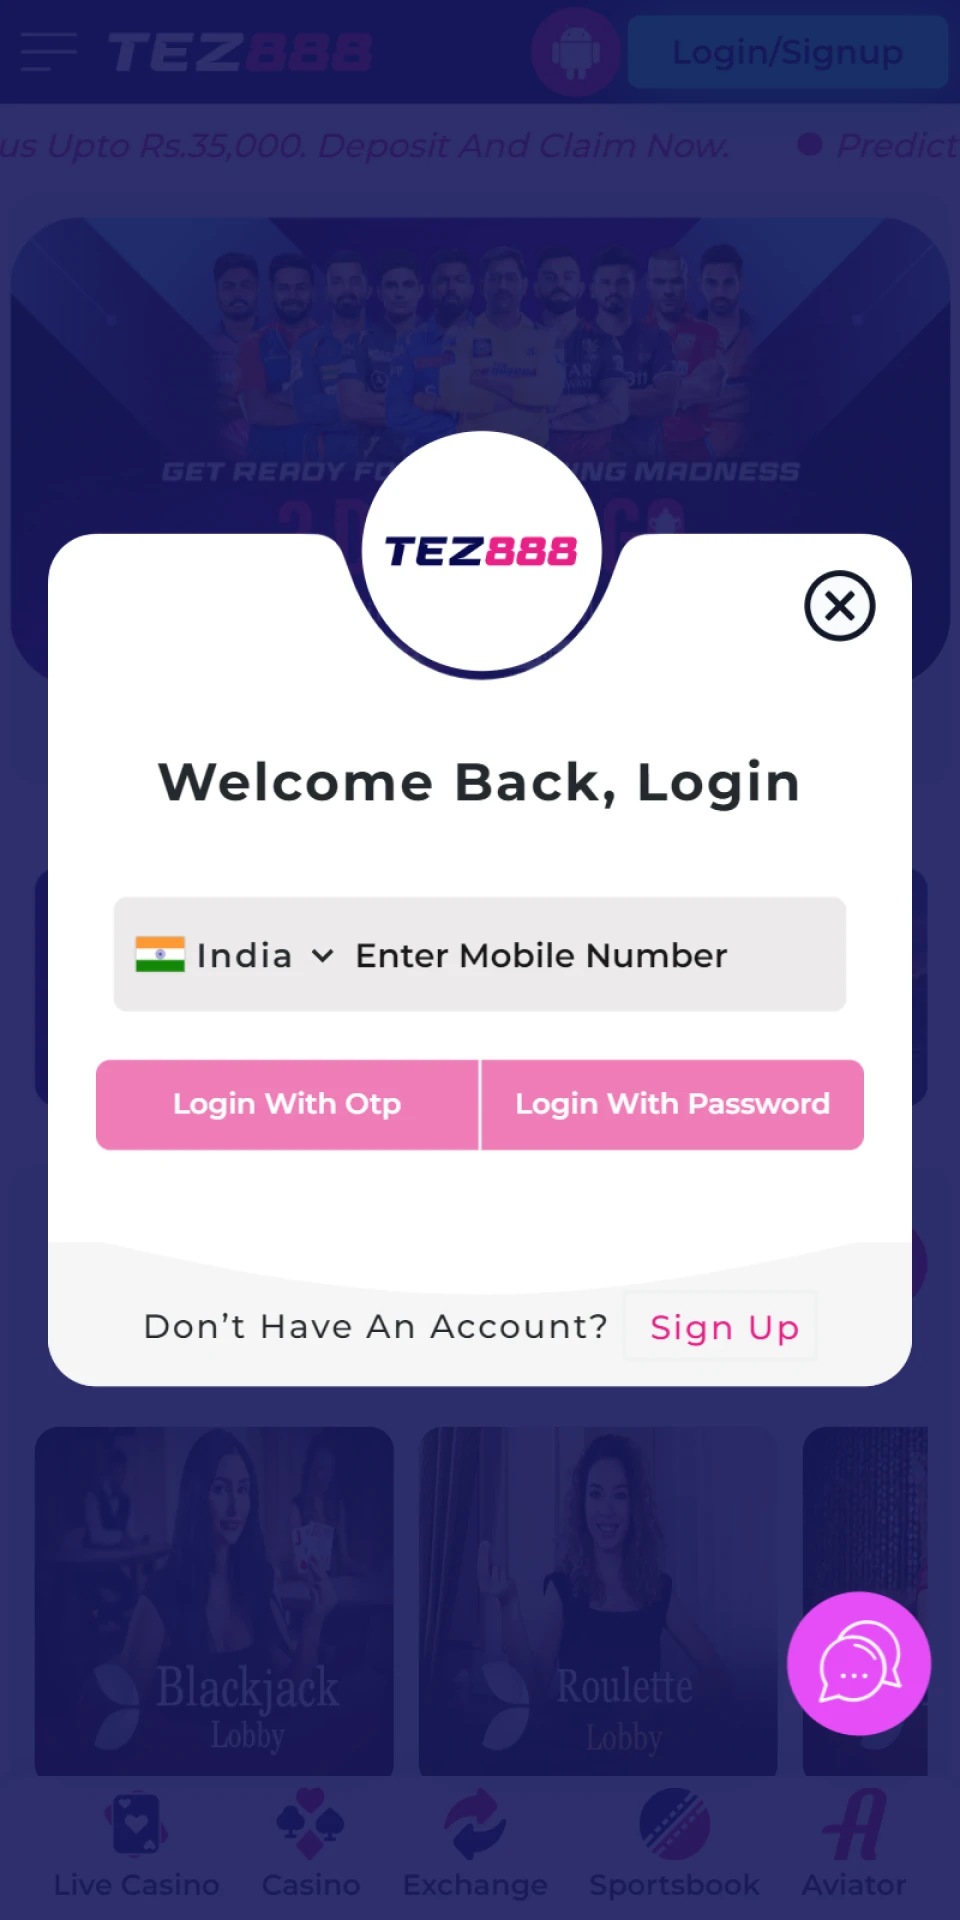 Log in to your account on the Tez888 mobile site using your iOS device.